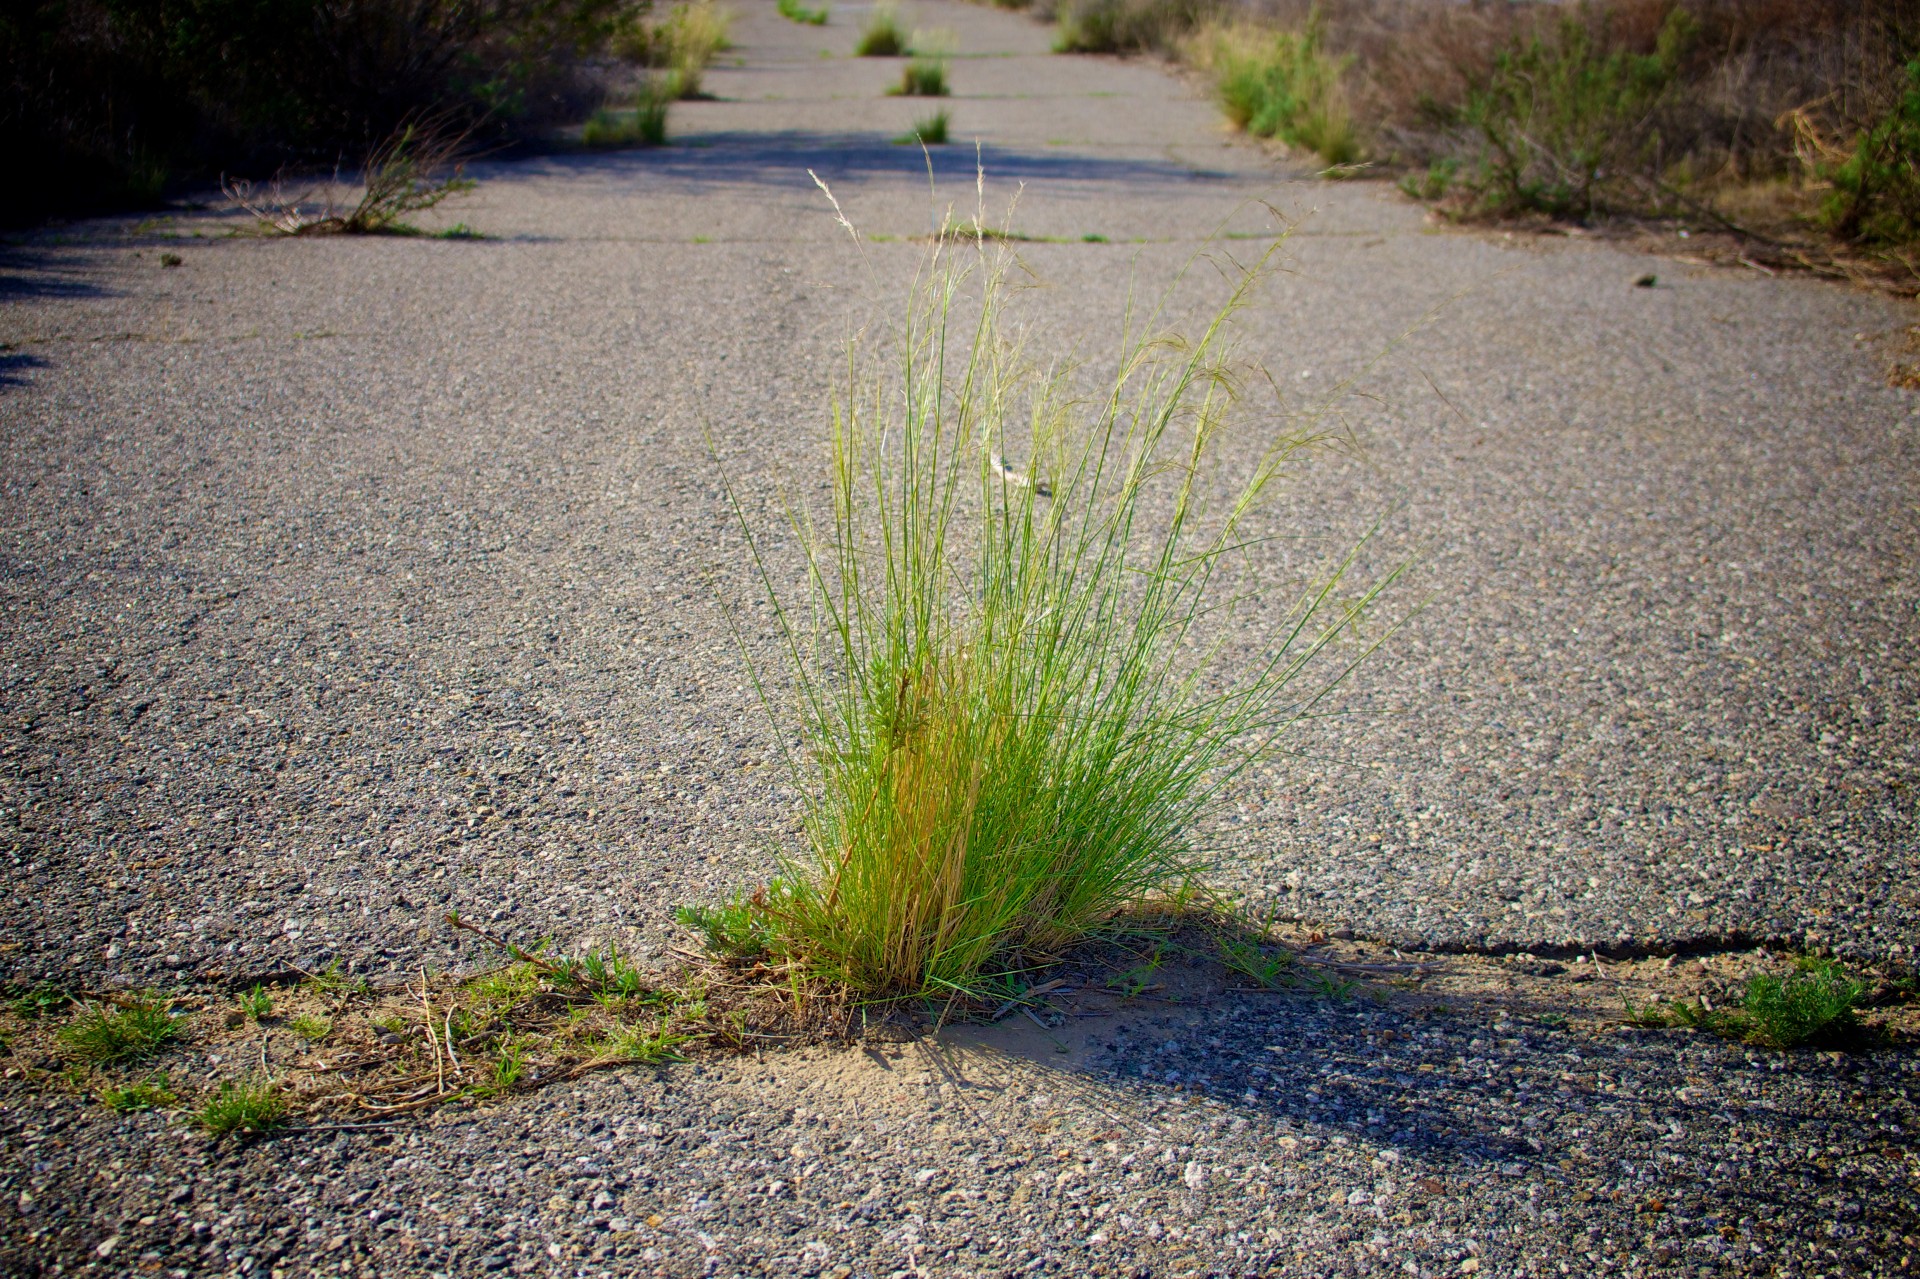 Stalks Of Grass In Road